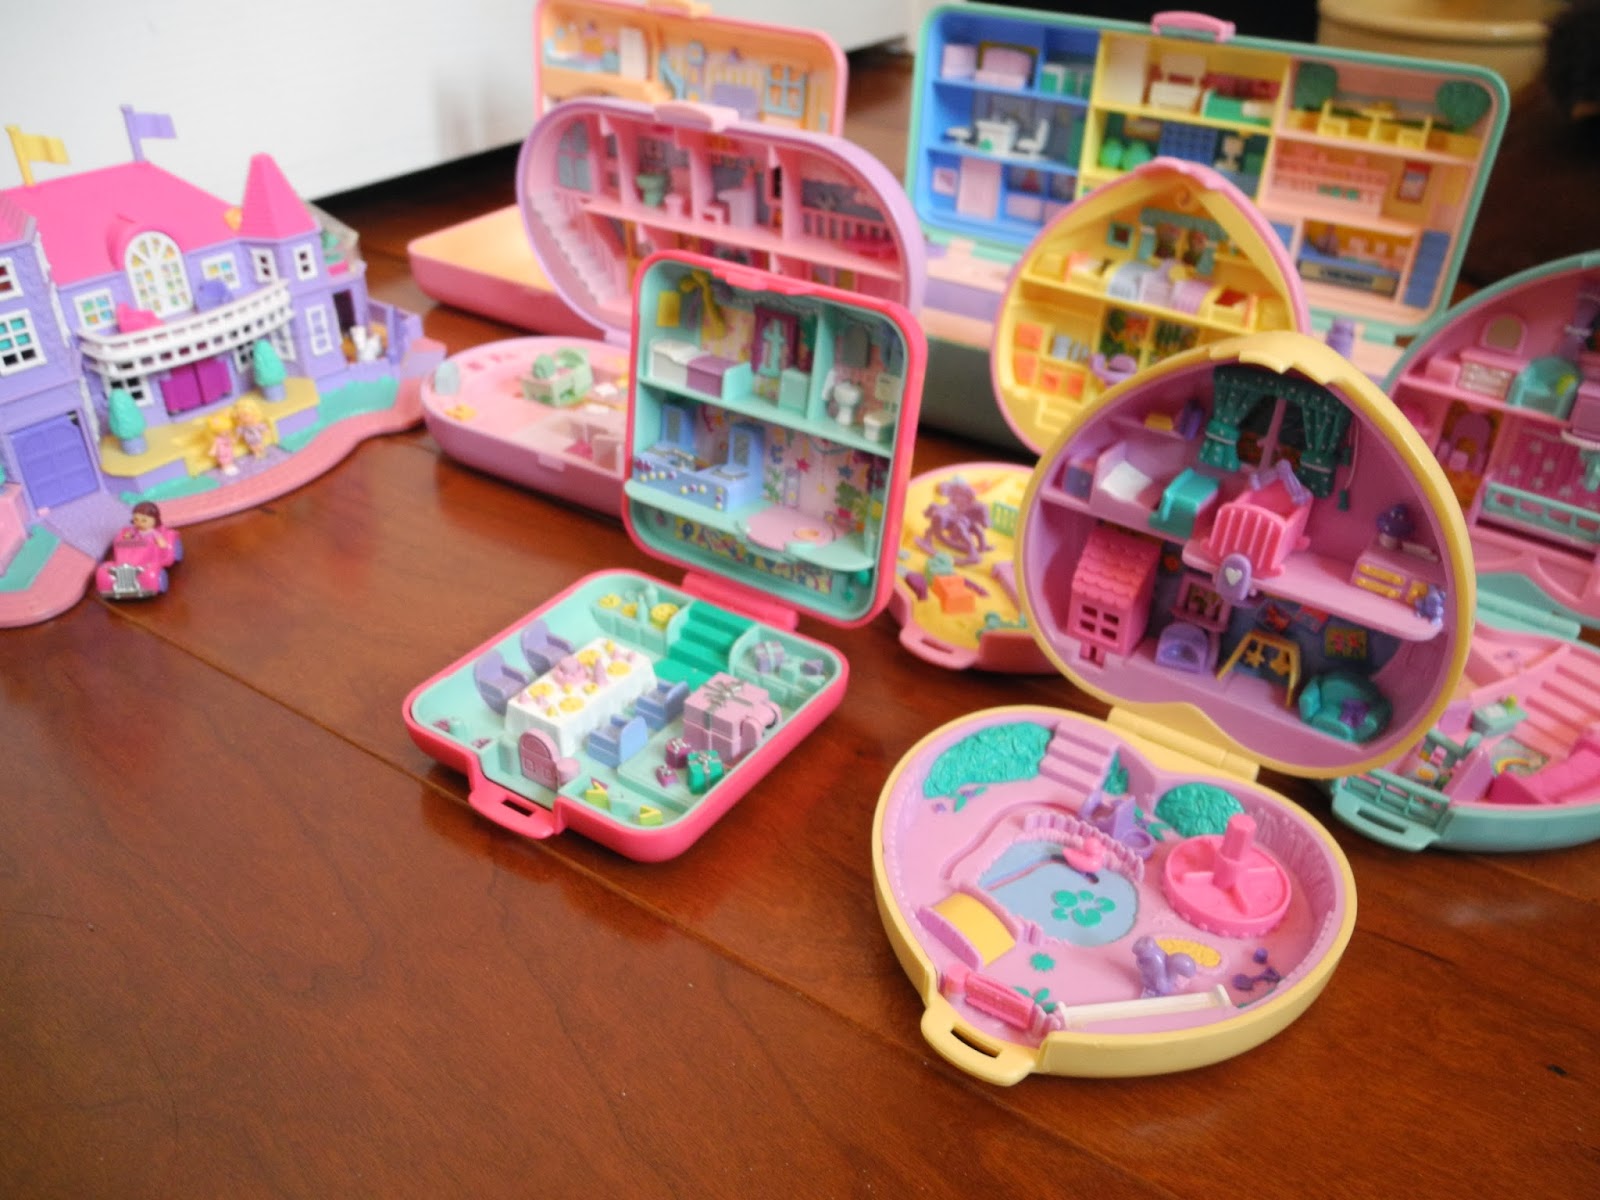 the old polly pocket